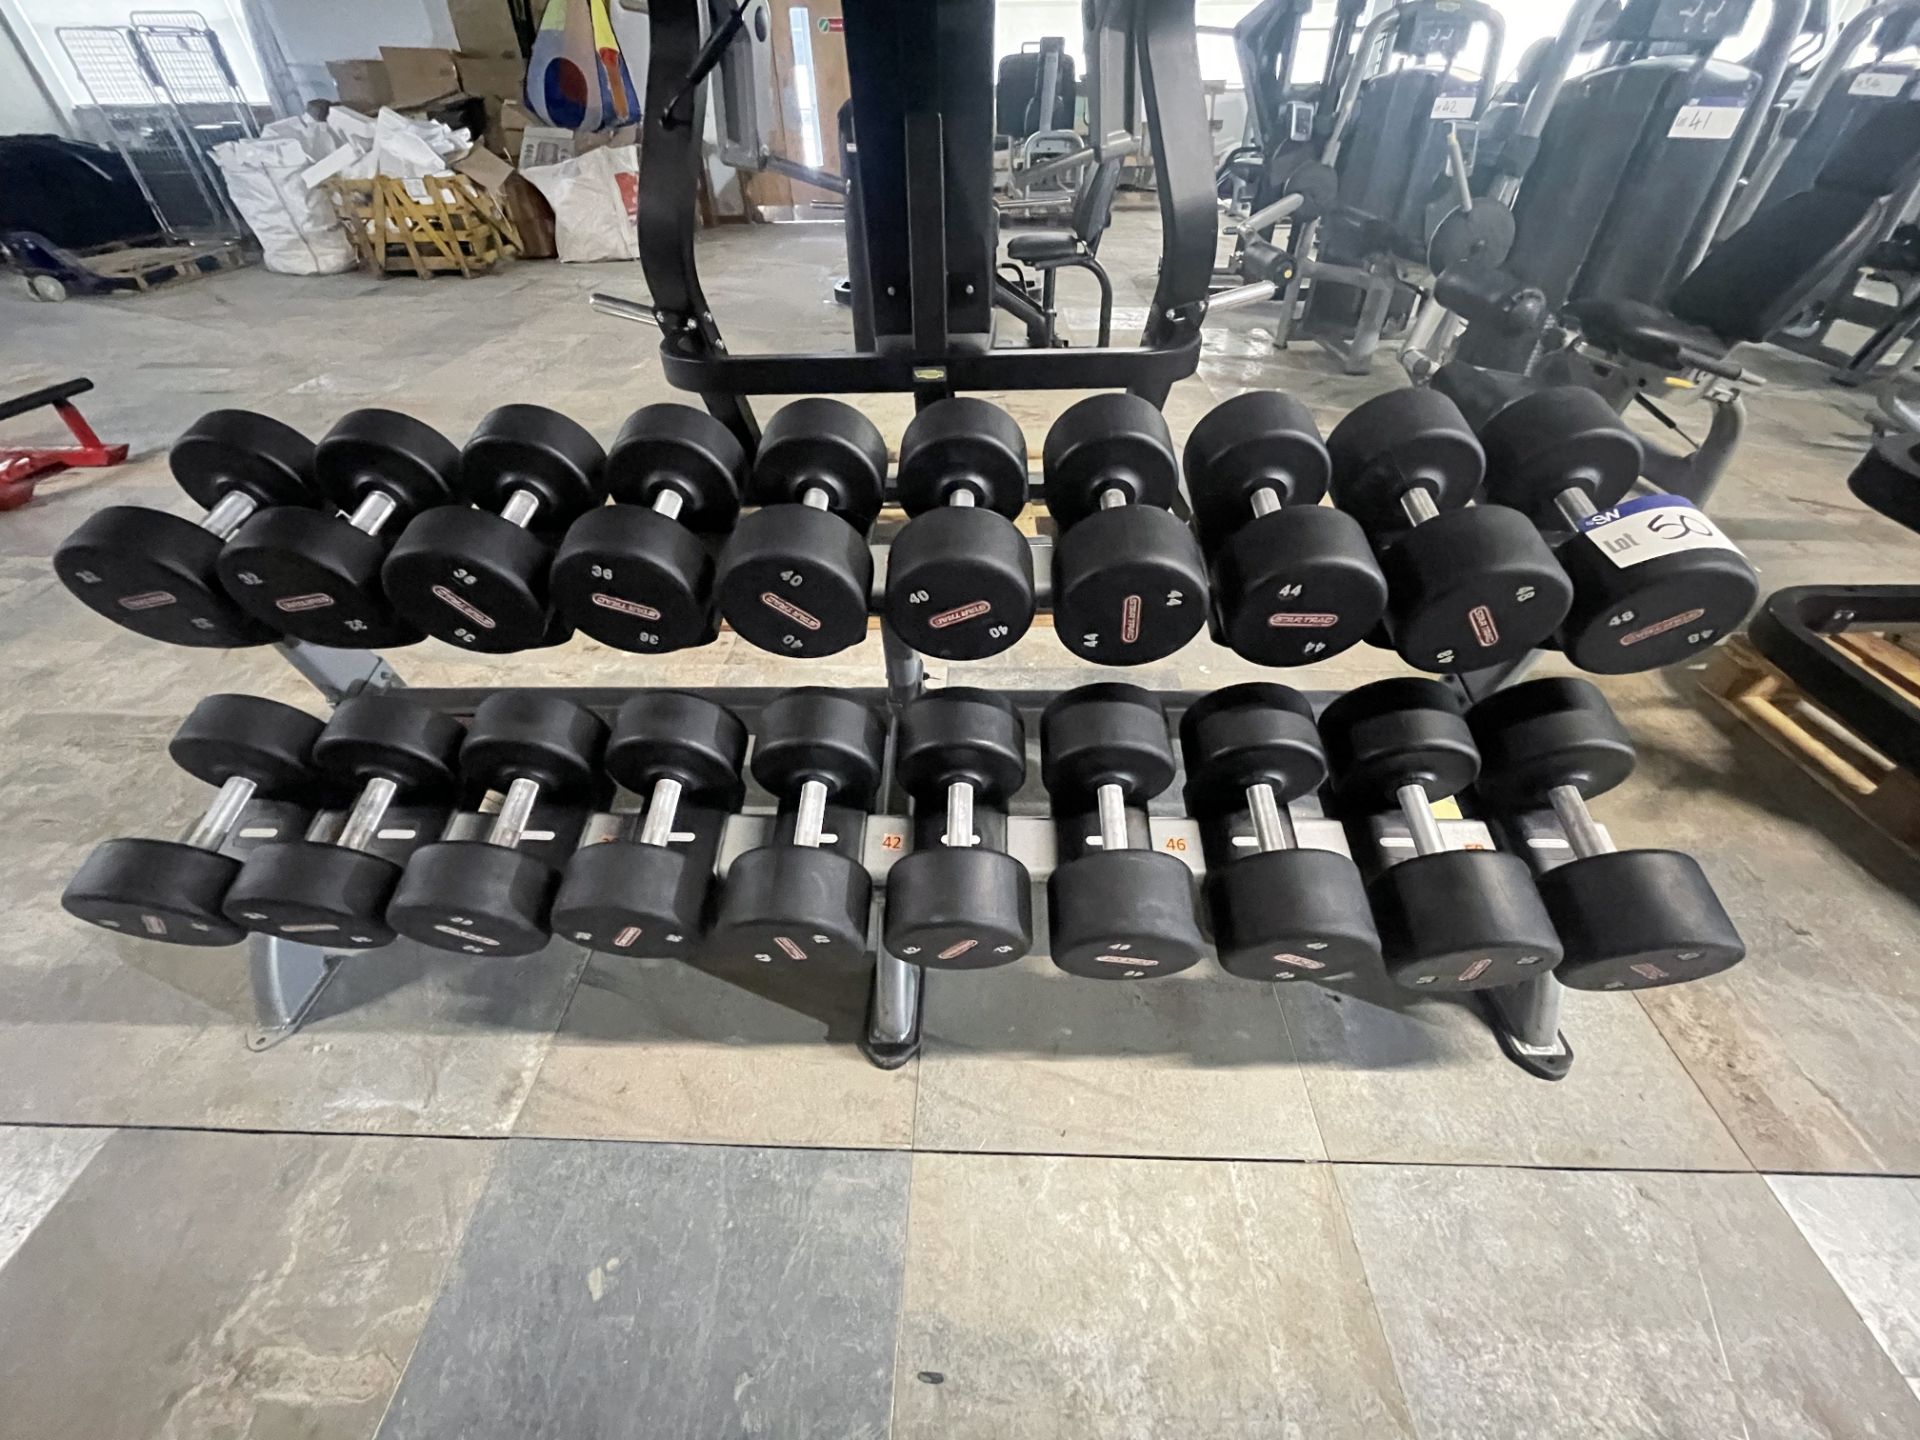 Star Trac 22 Section Dumbbell Stand